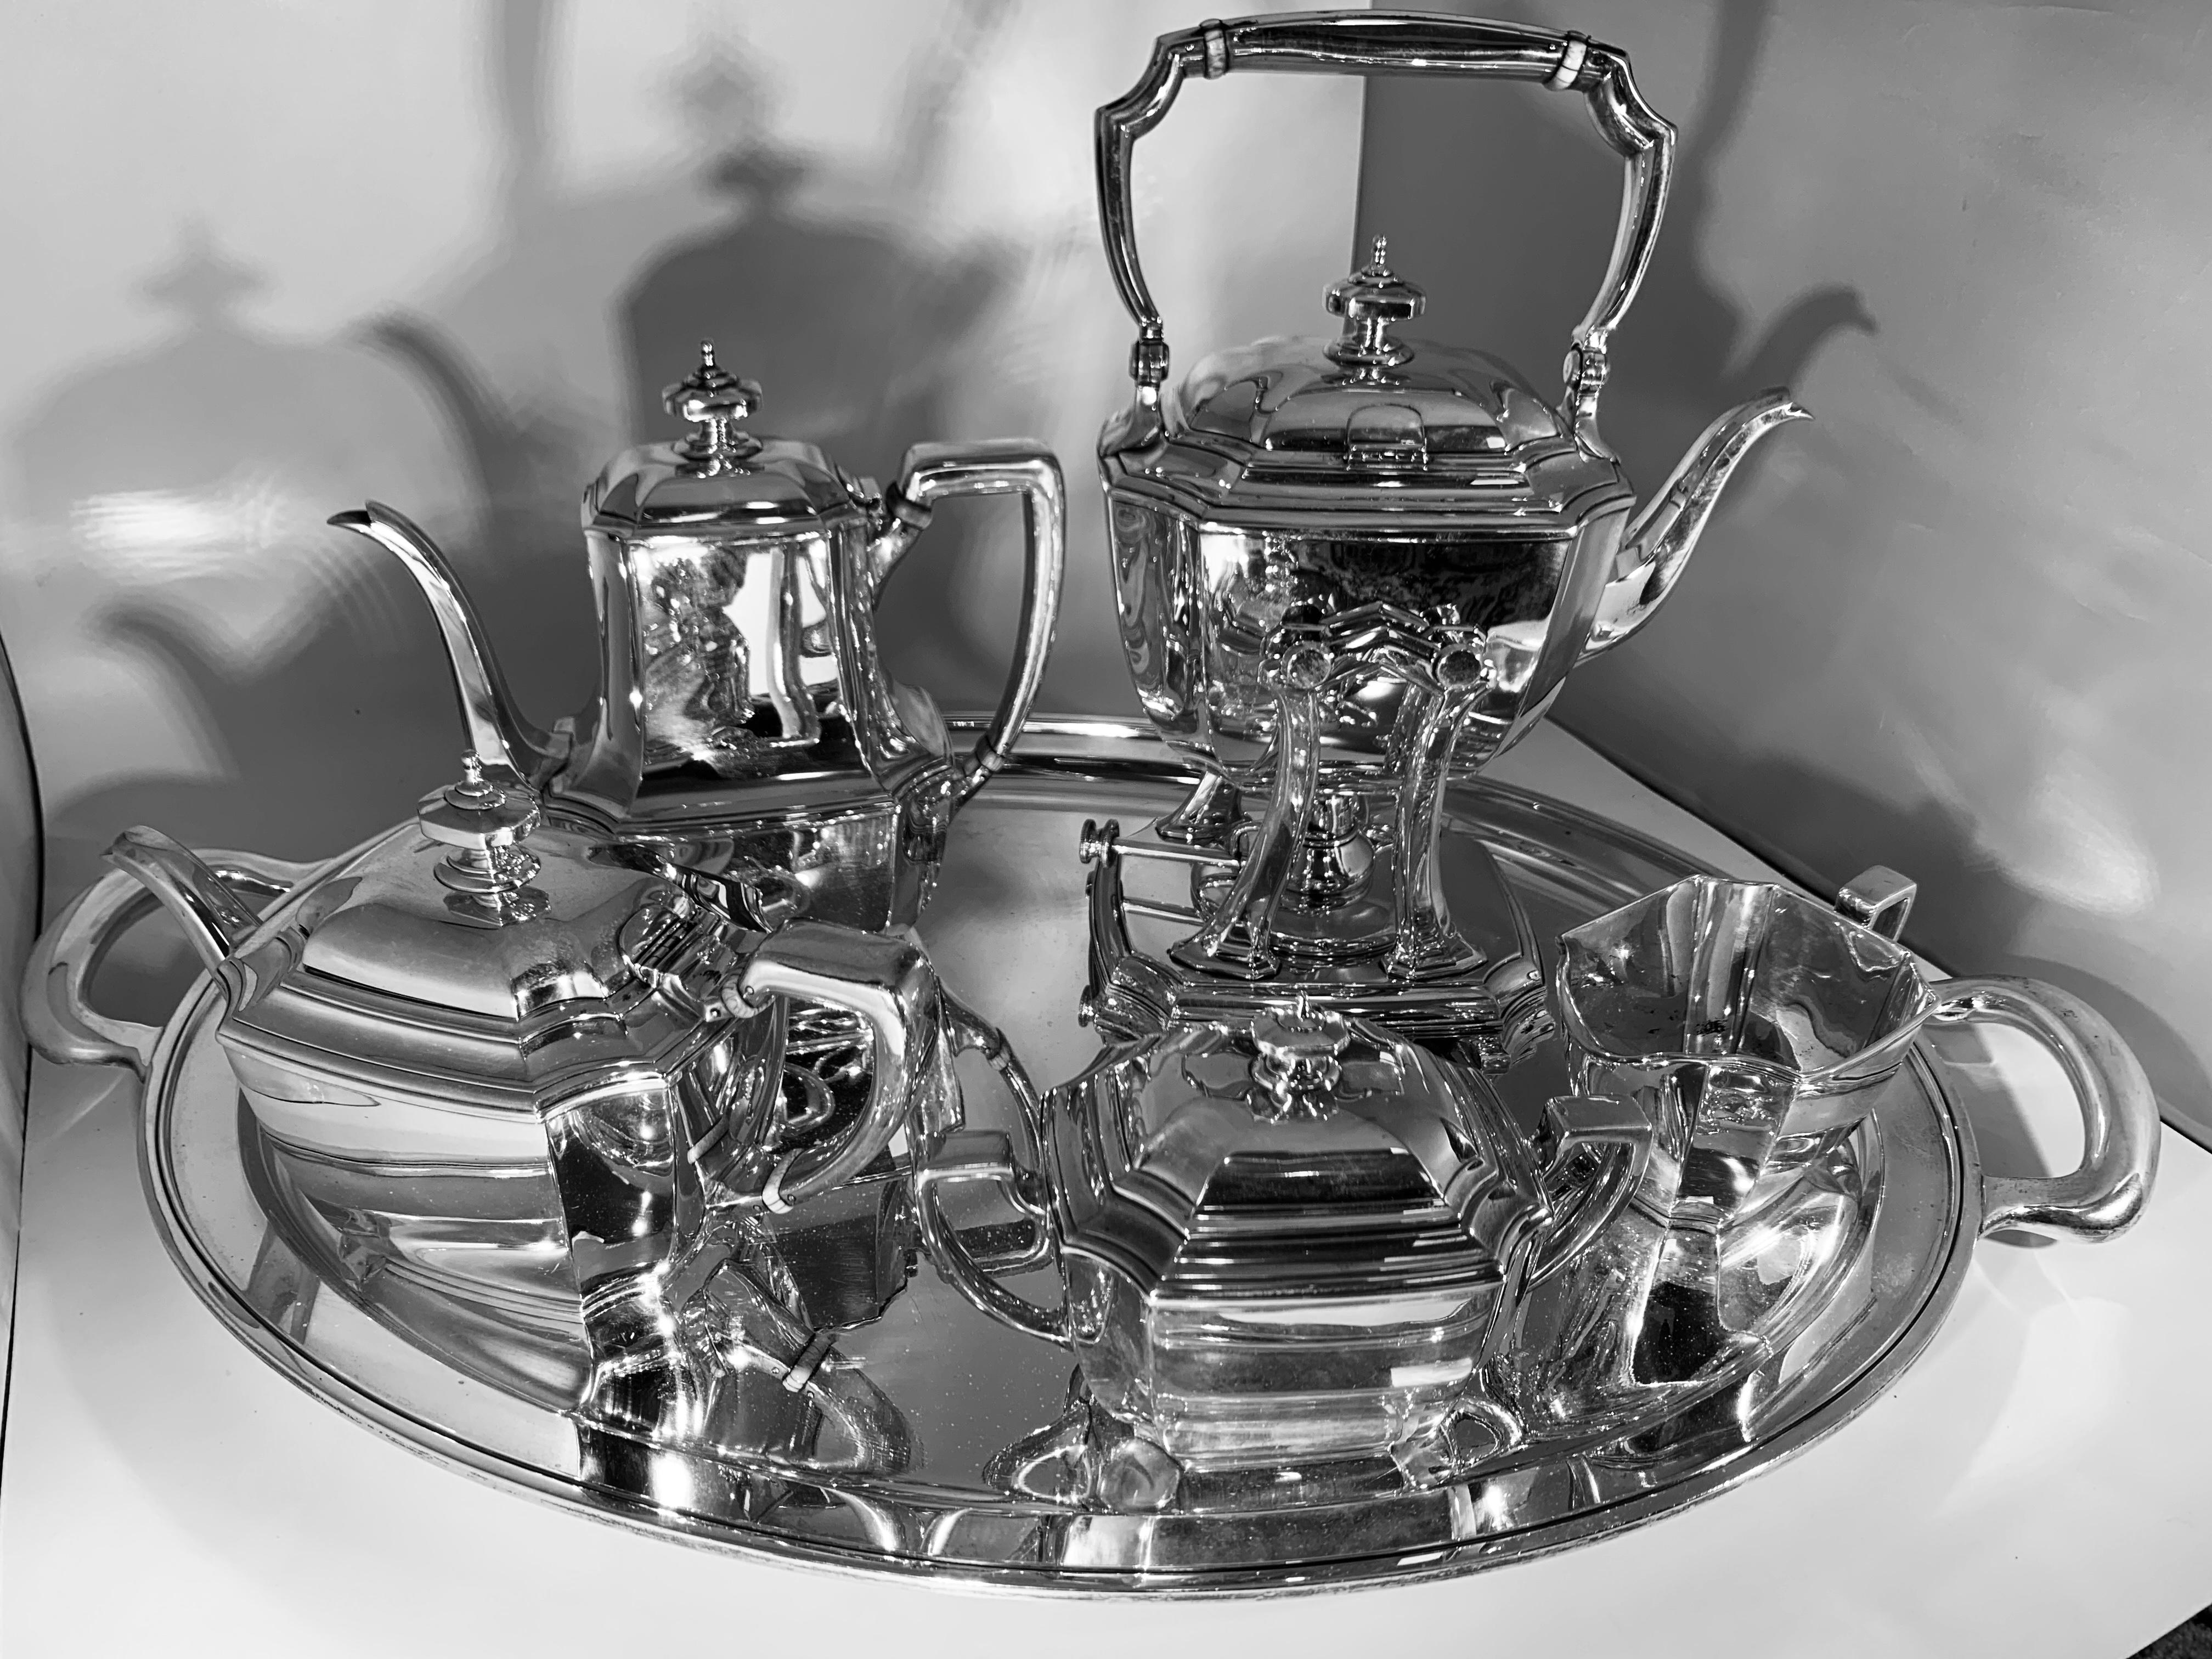 Very Exclusive 
A Tiffany & Co maker's sterling silver tea set, complete with serving tray.
Six Piece Tiffany & Co. Makers Sterling Silver Complete Tea Set
Each piece is signed and engraved Tiffany & CO Makers , Sterling Silver 925 
The set includes